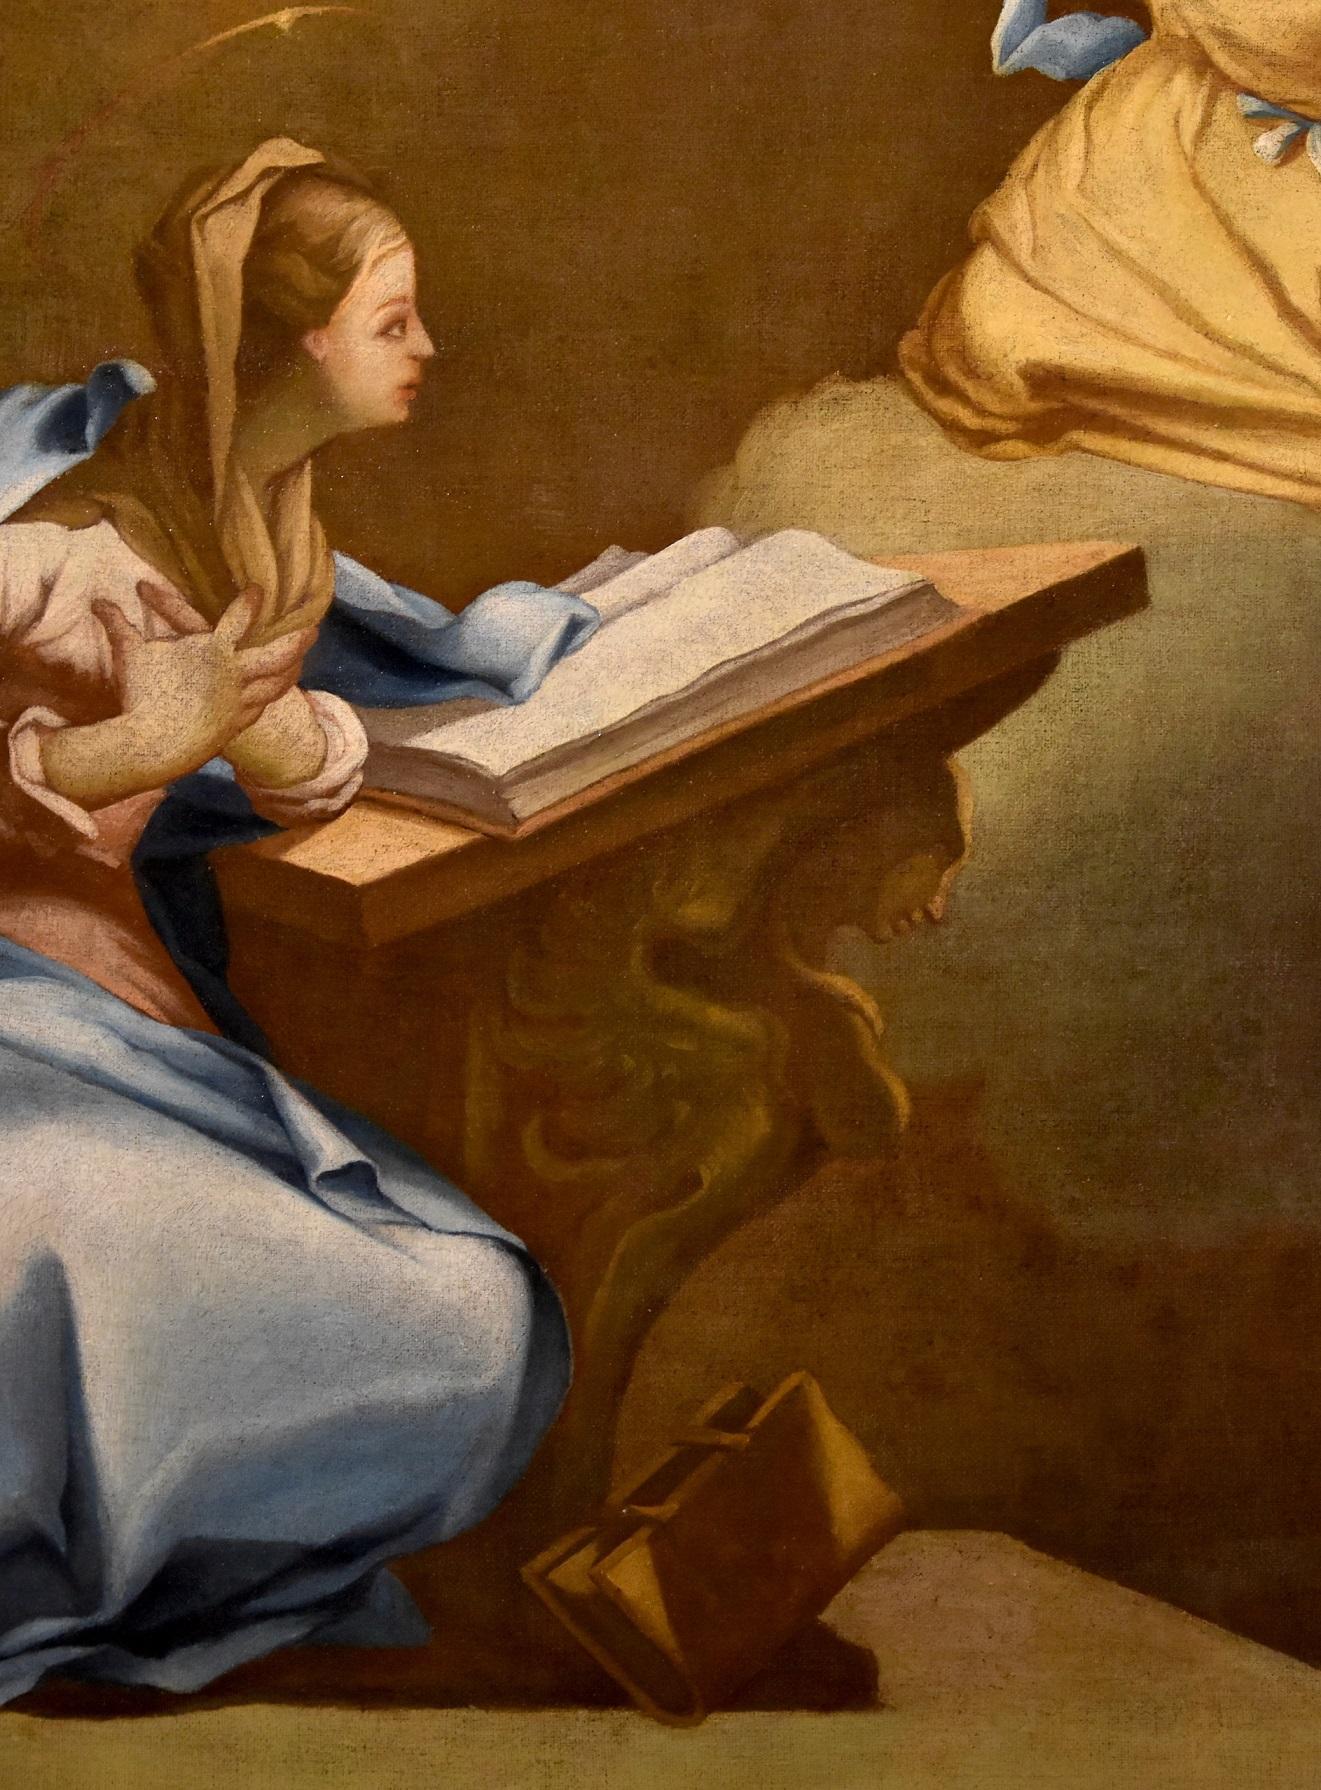 Annunciation De Matteis Paint Oil on canvas Old master 17/18th Century Leonardo - Old Masters Painting by Paolo De Matteis (Piano Vetrale, 1662 - Naples, 1728)